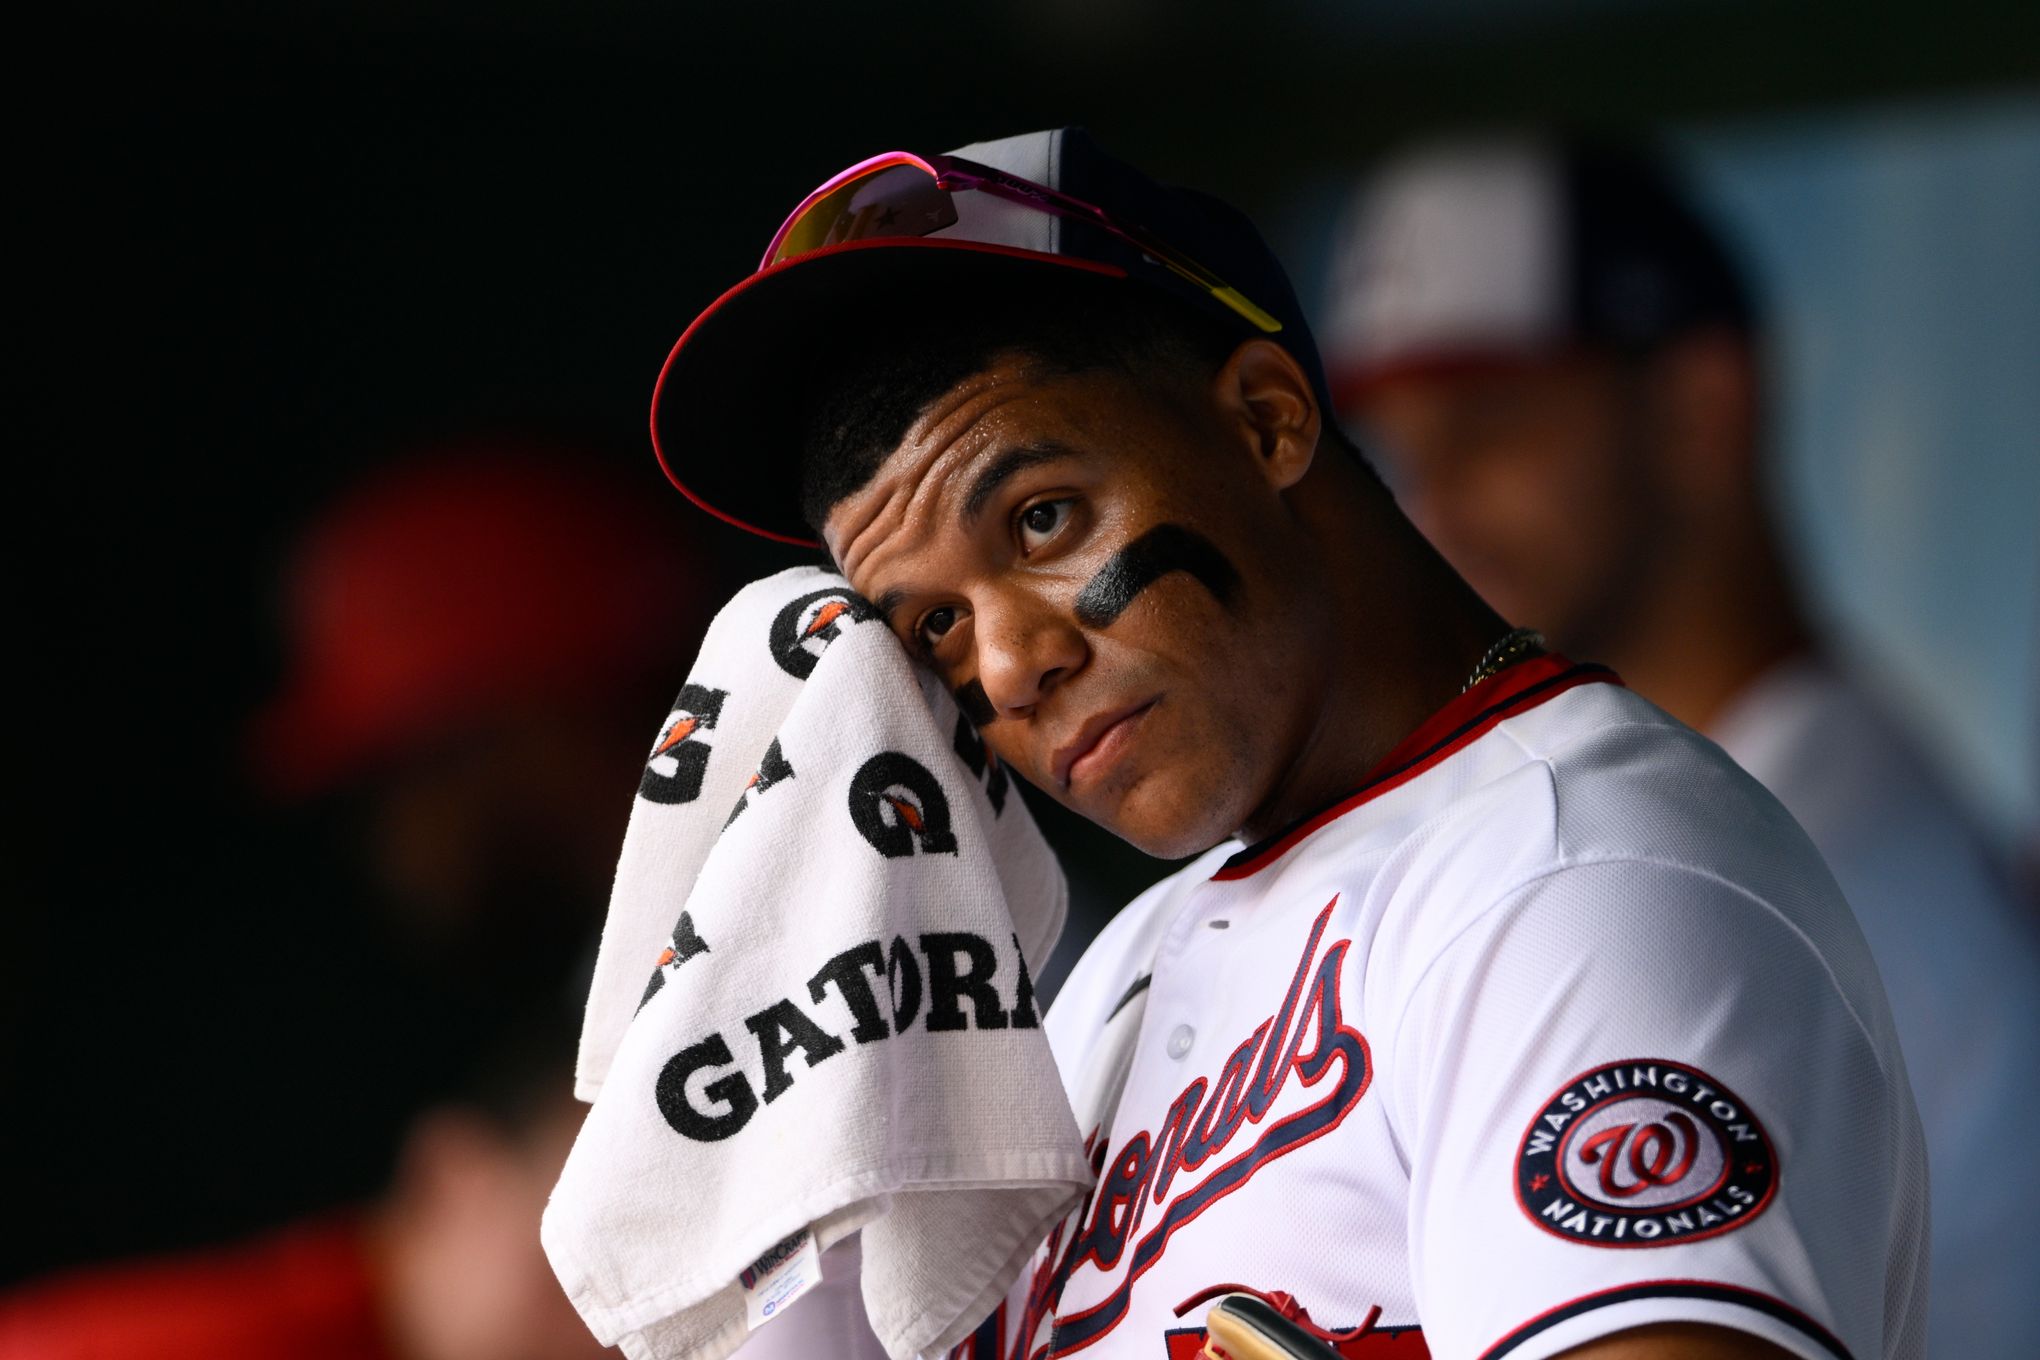 The best trade package Dodgers must offer for Nationals' Juan Soto